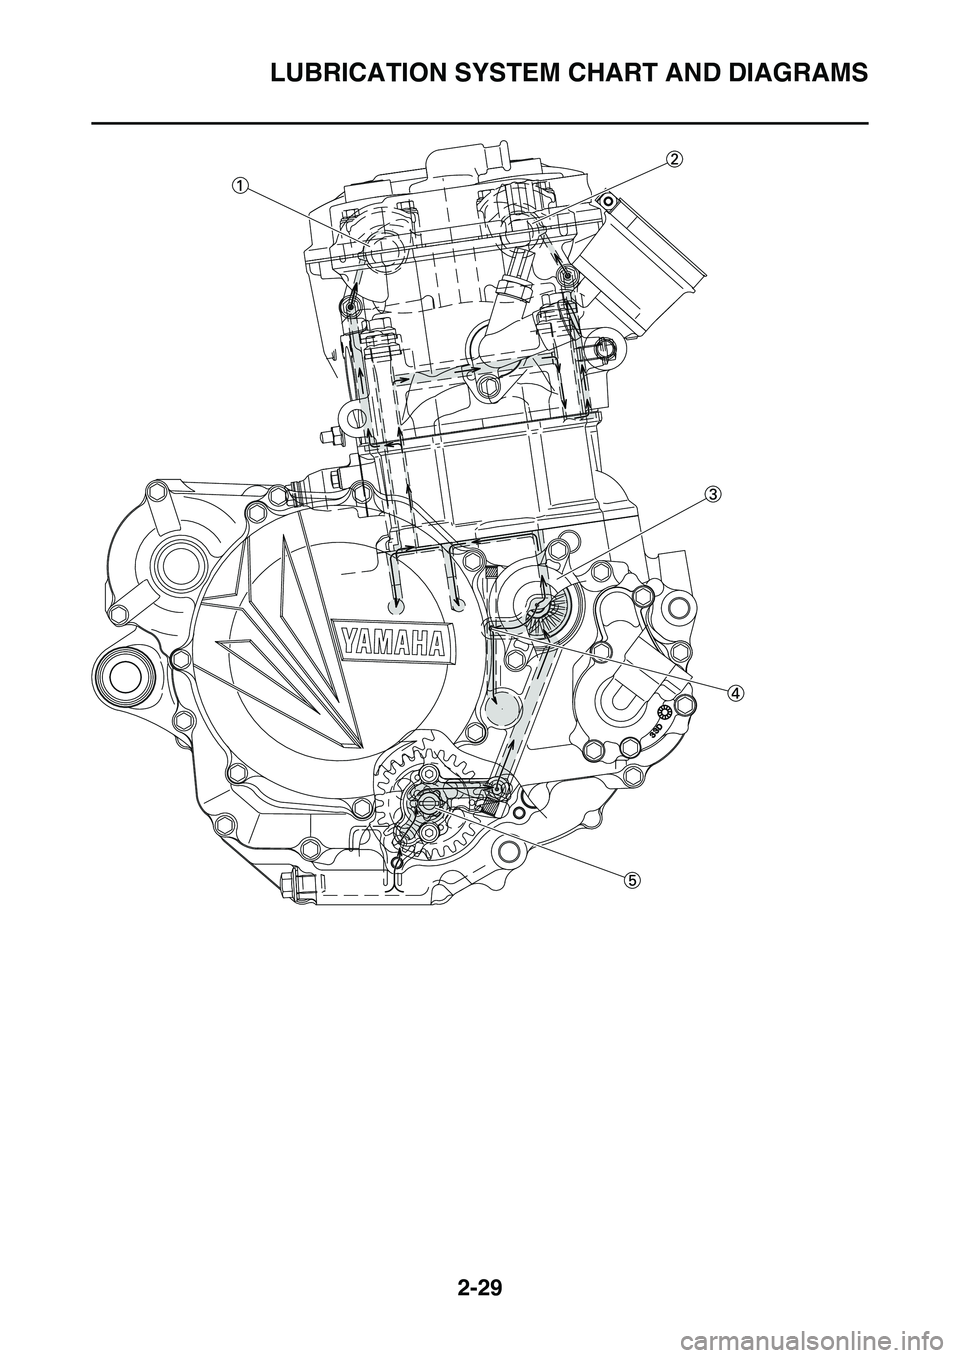 YAMAHA YZ450F 2014  Owners Manual LUBRICATION SYSTEM CHART AND DIAGRAMS
2-29 